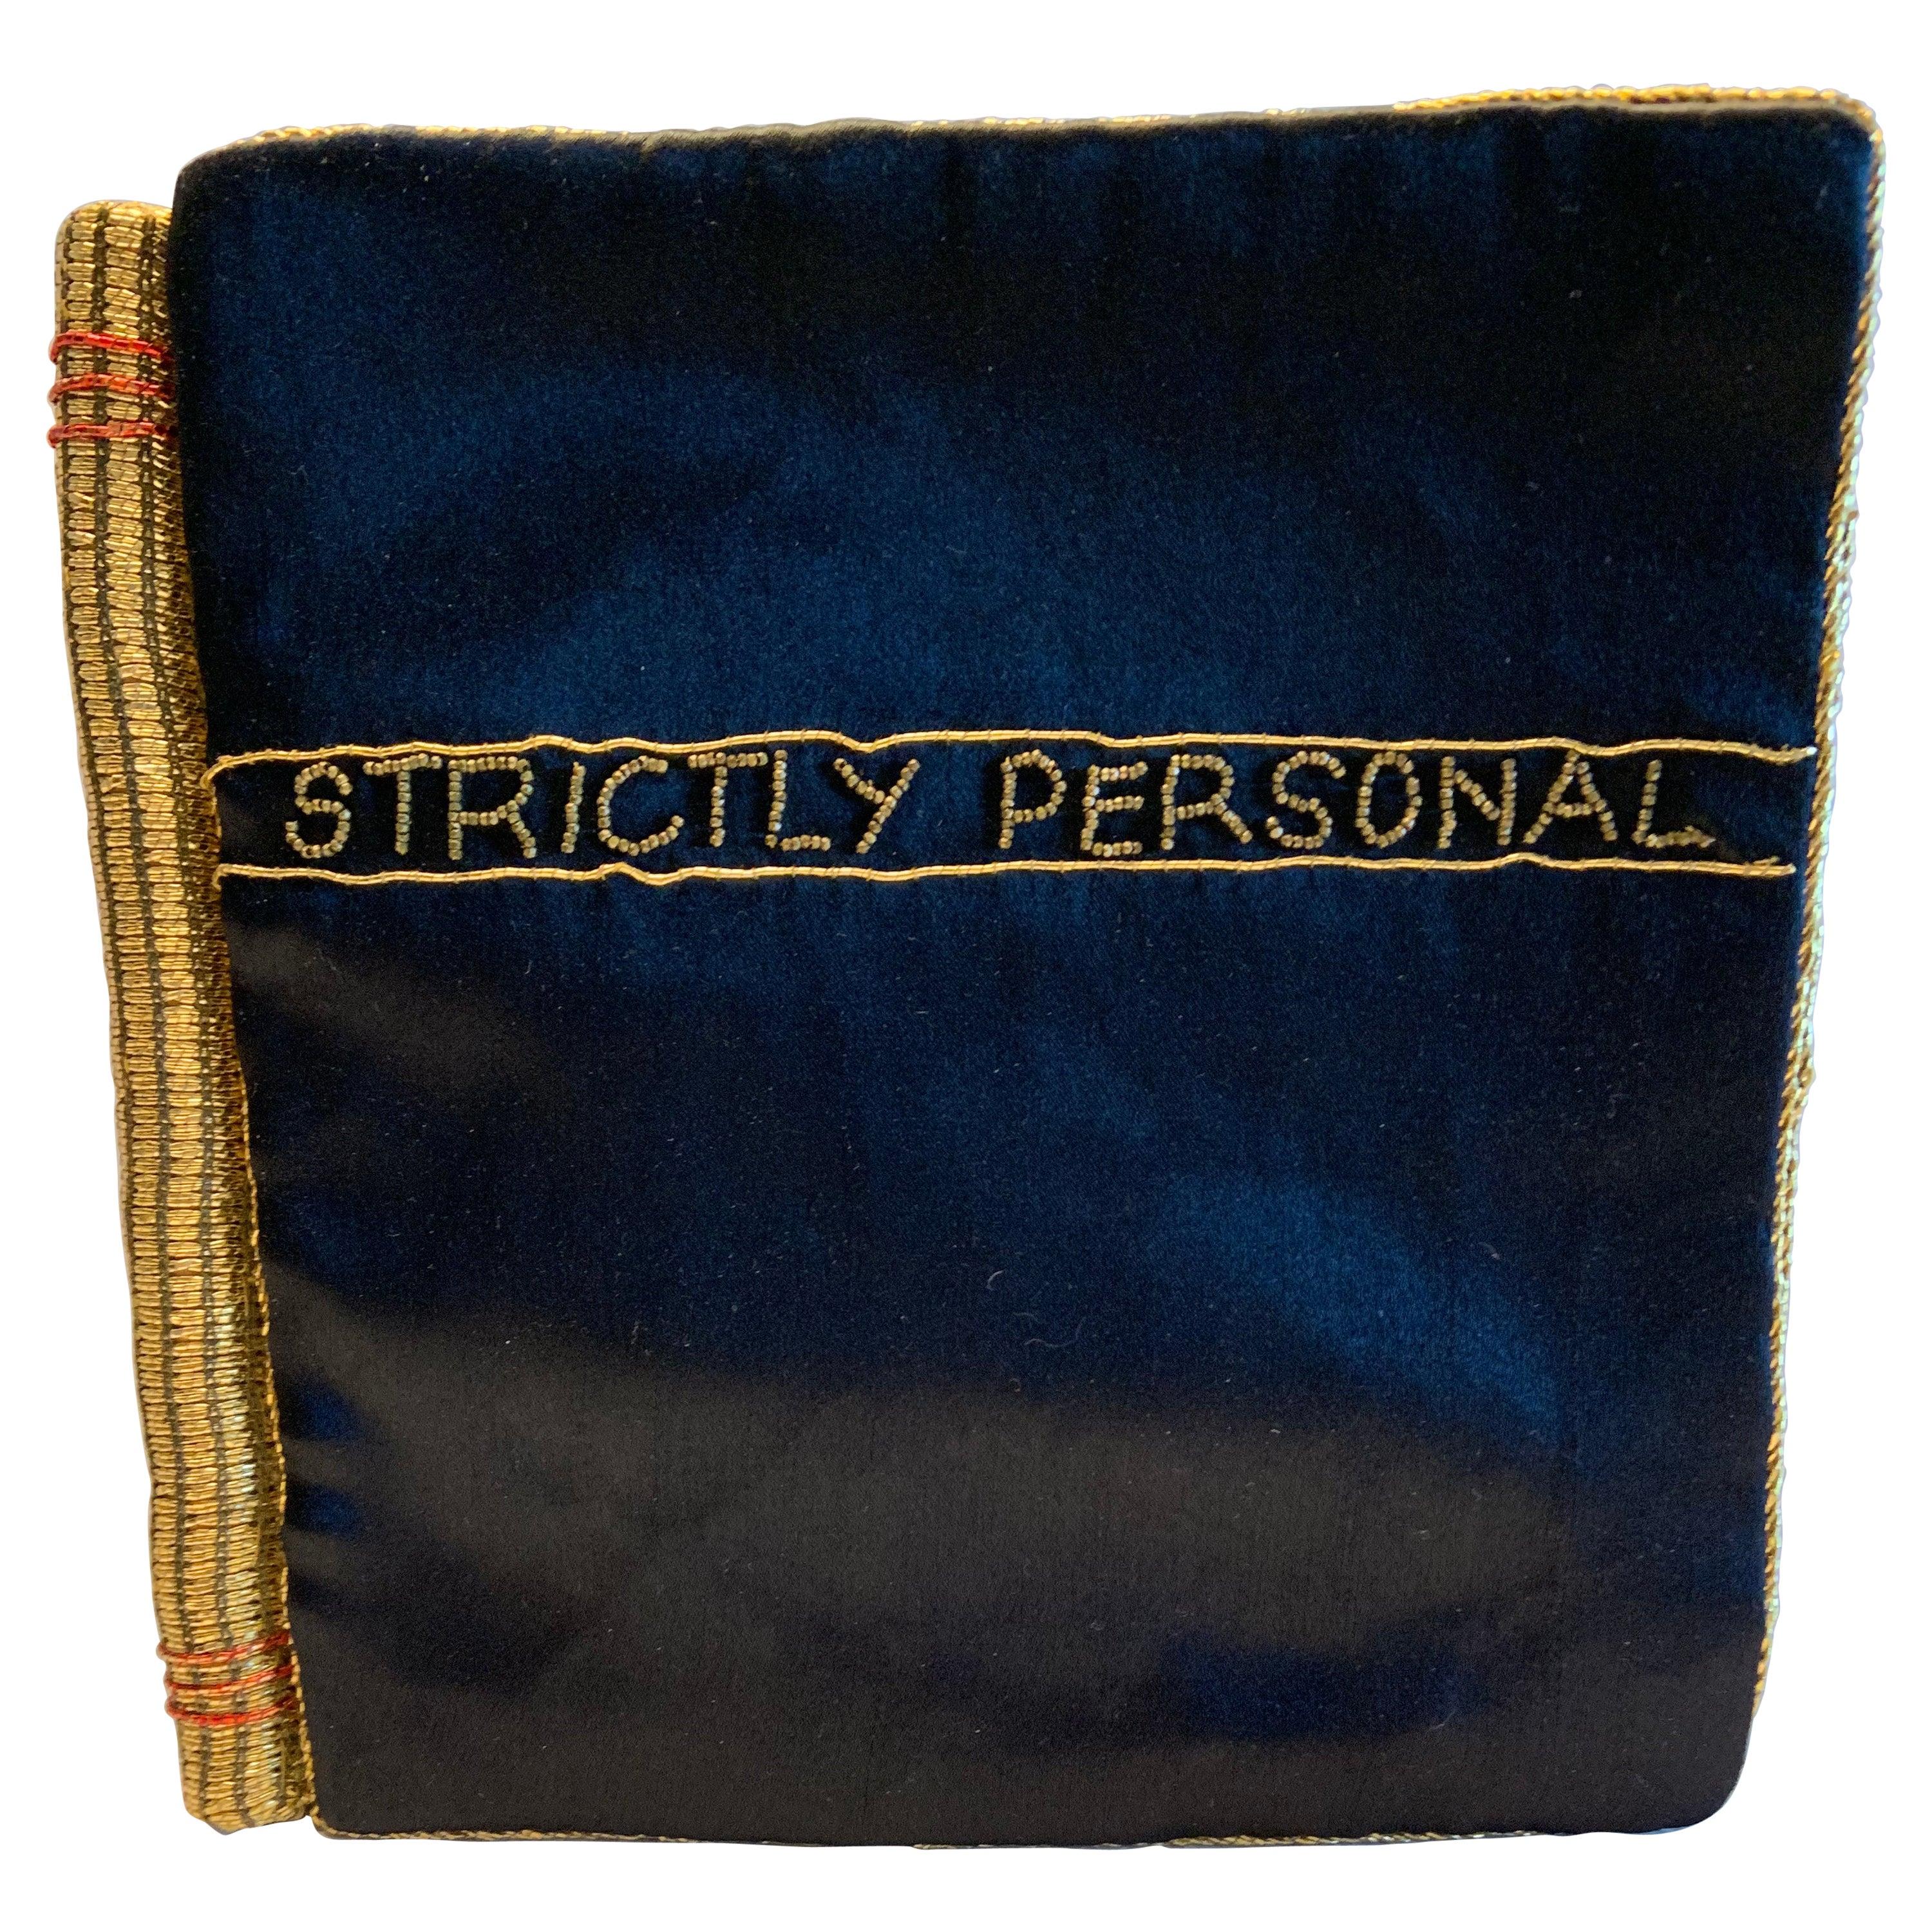 Strictly Personal Purse Black Satin and Gold Beads Shaped Like A Secret Diary 